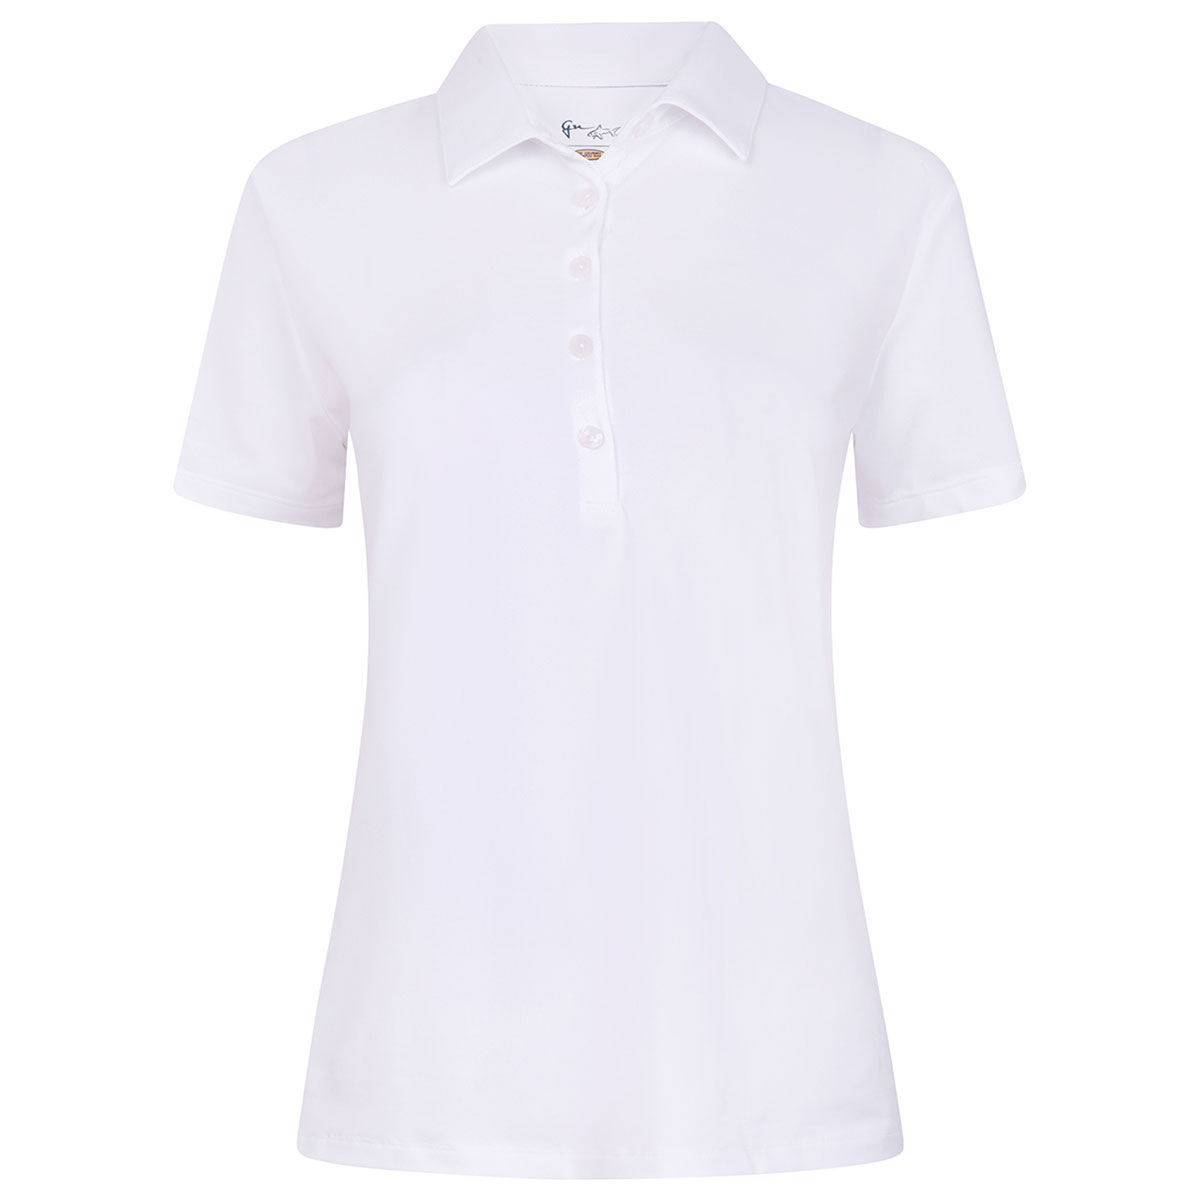 Greg Norman White Embroidered Freedom Pique Golf Polo Shirt, Womens | American Golf, Size: Small